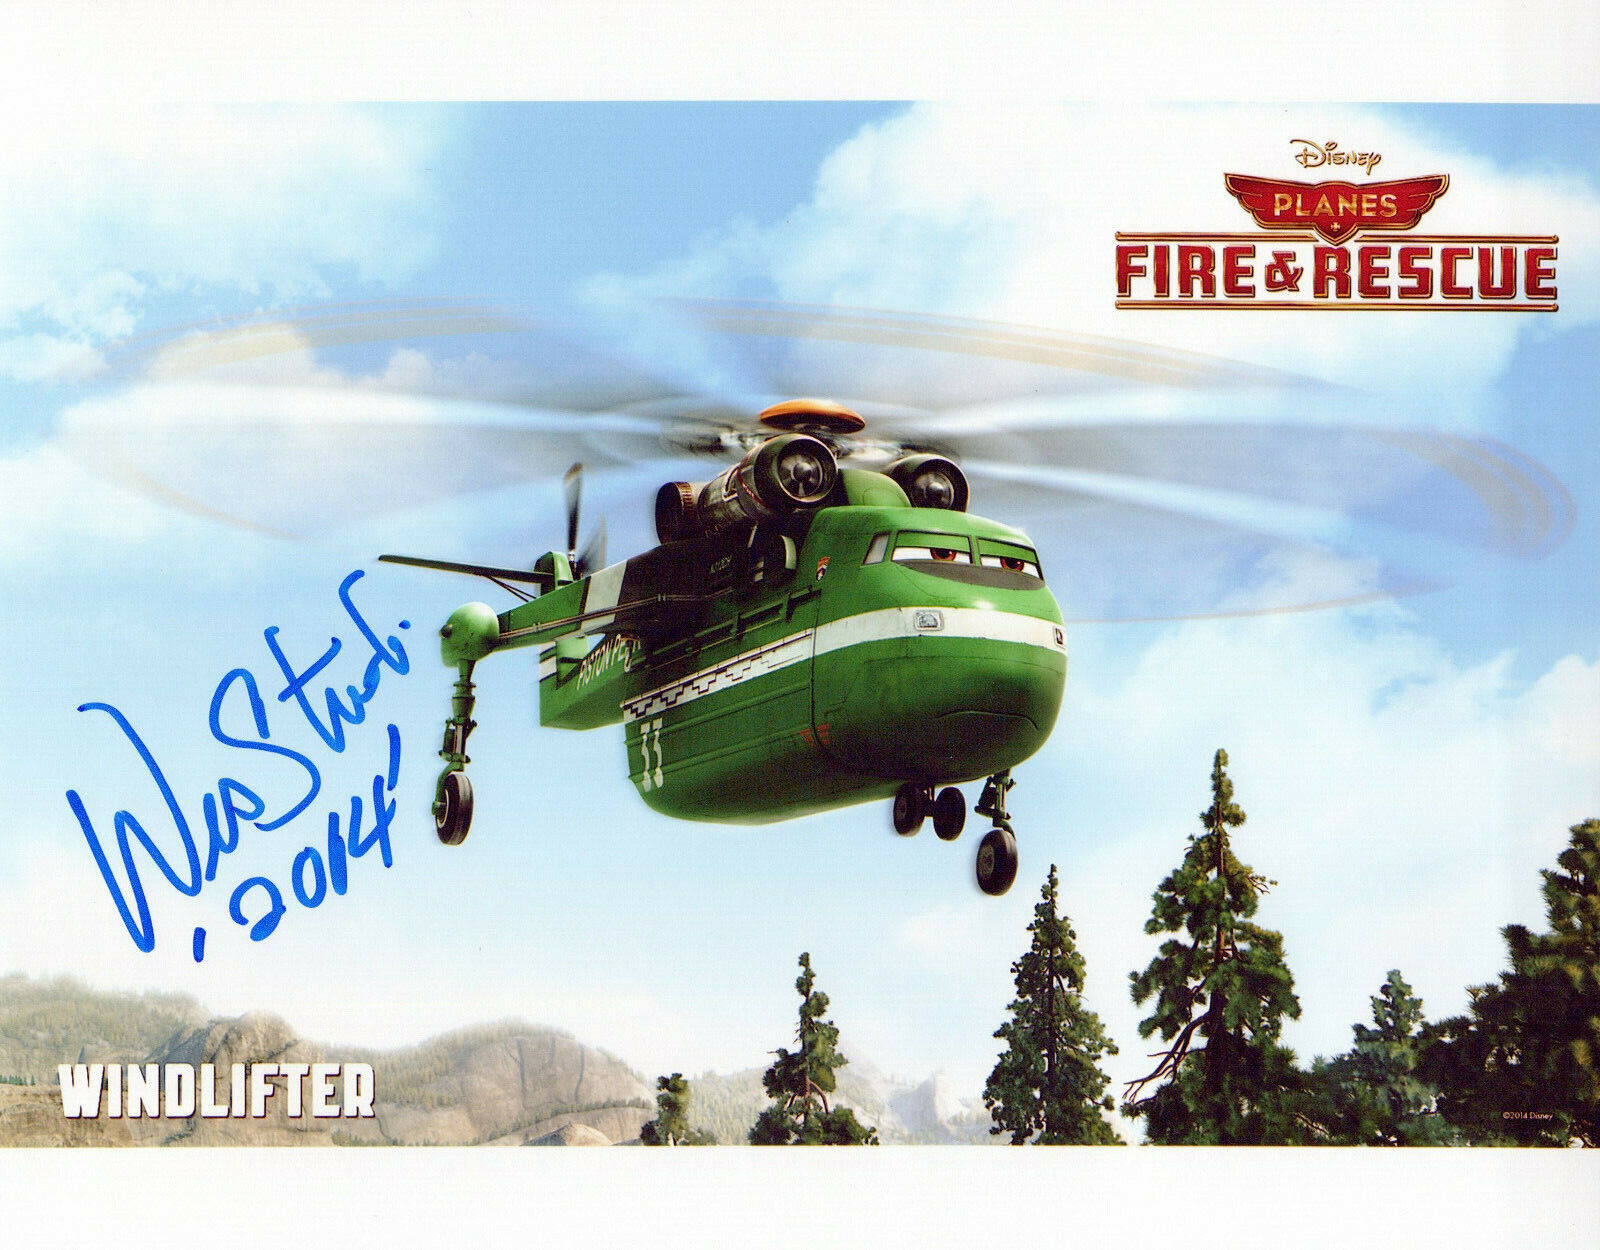 Wes Studi Planes: Fire & Rescue autographed Photo Poster painting signed 8X10 #1 Windlifter rare